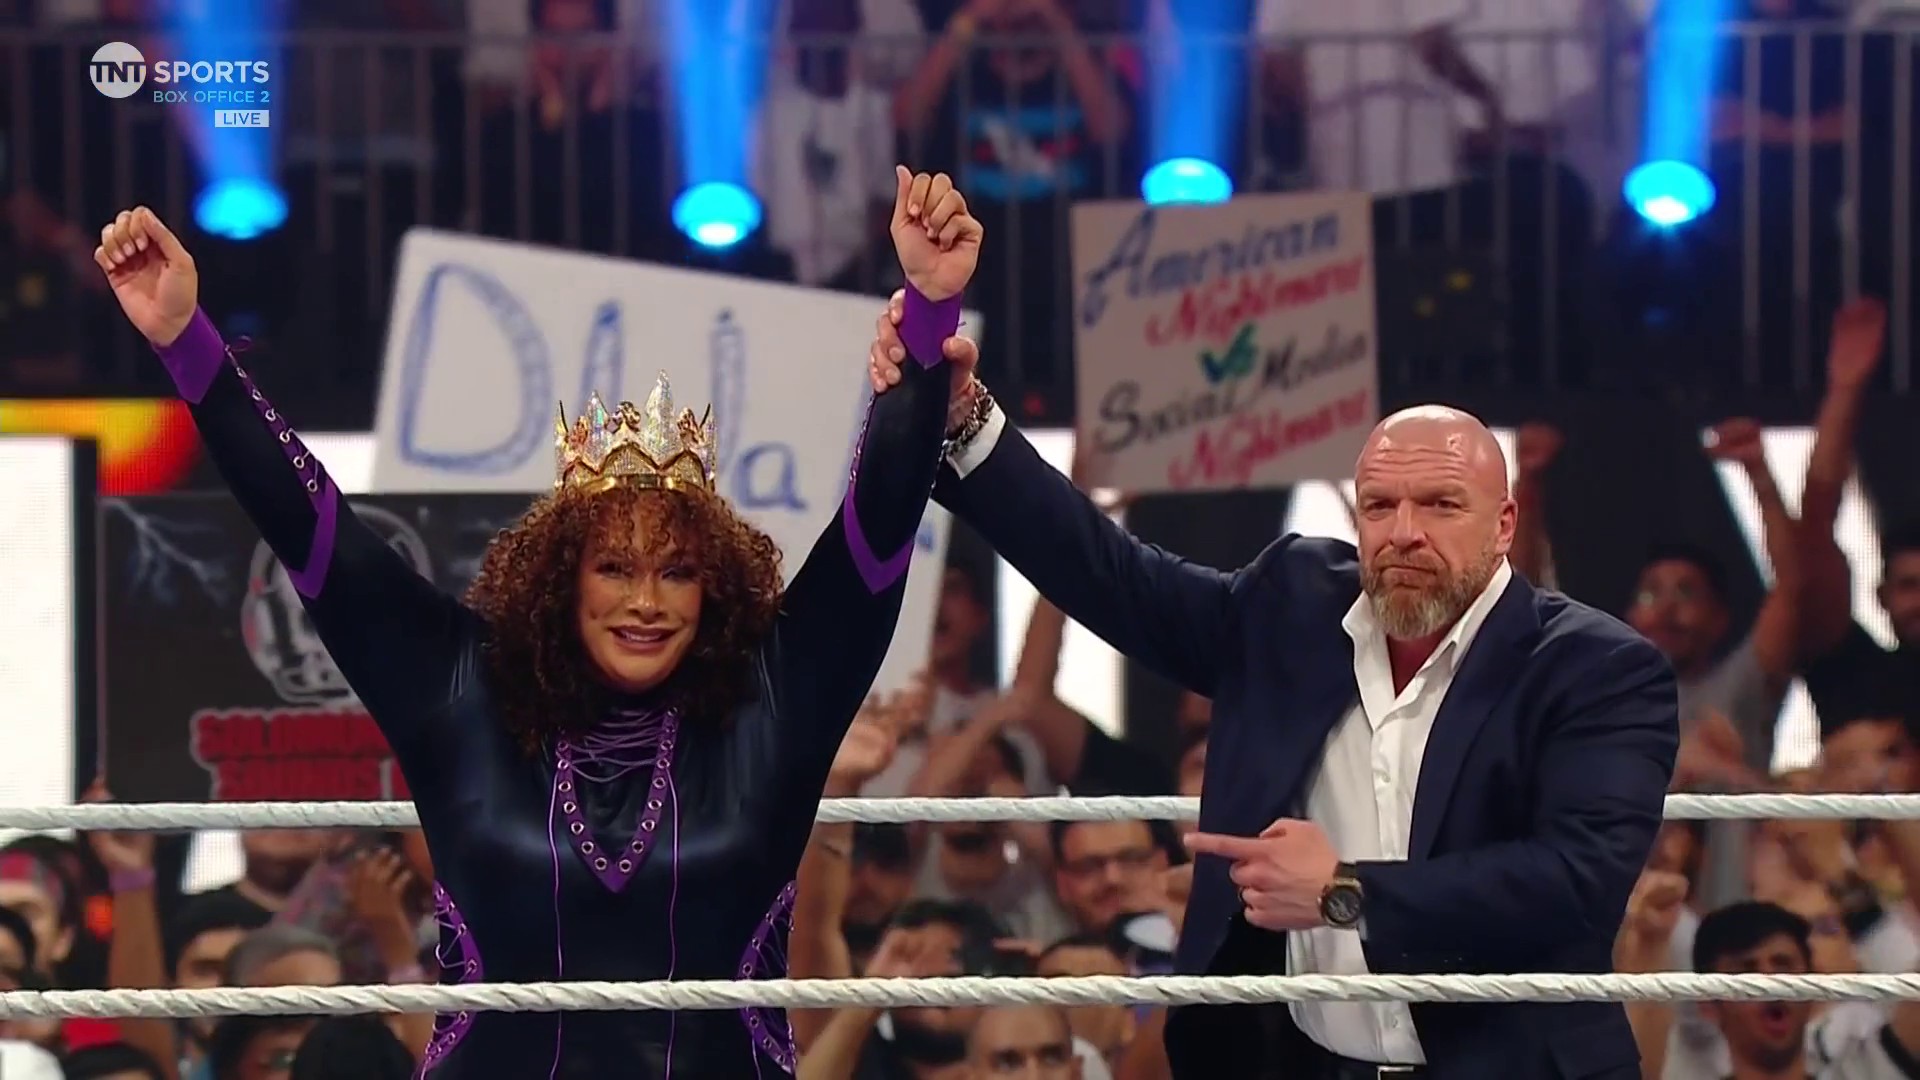 King & Queen of The Ring